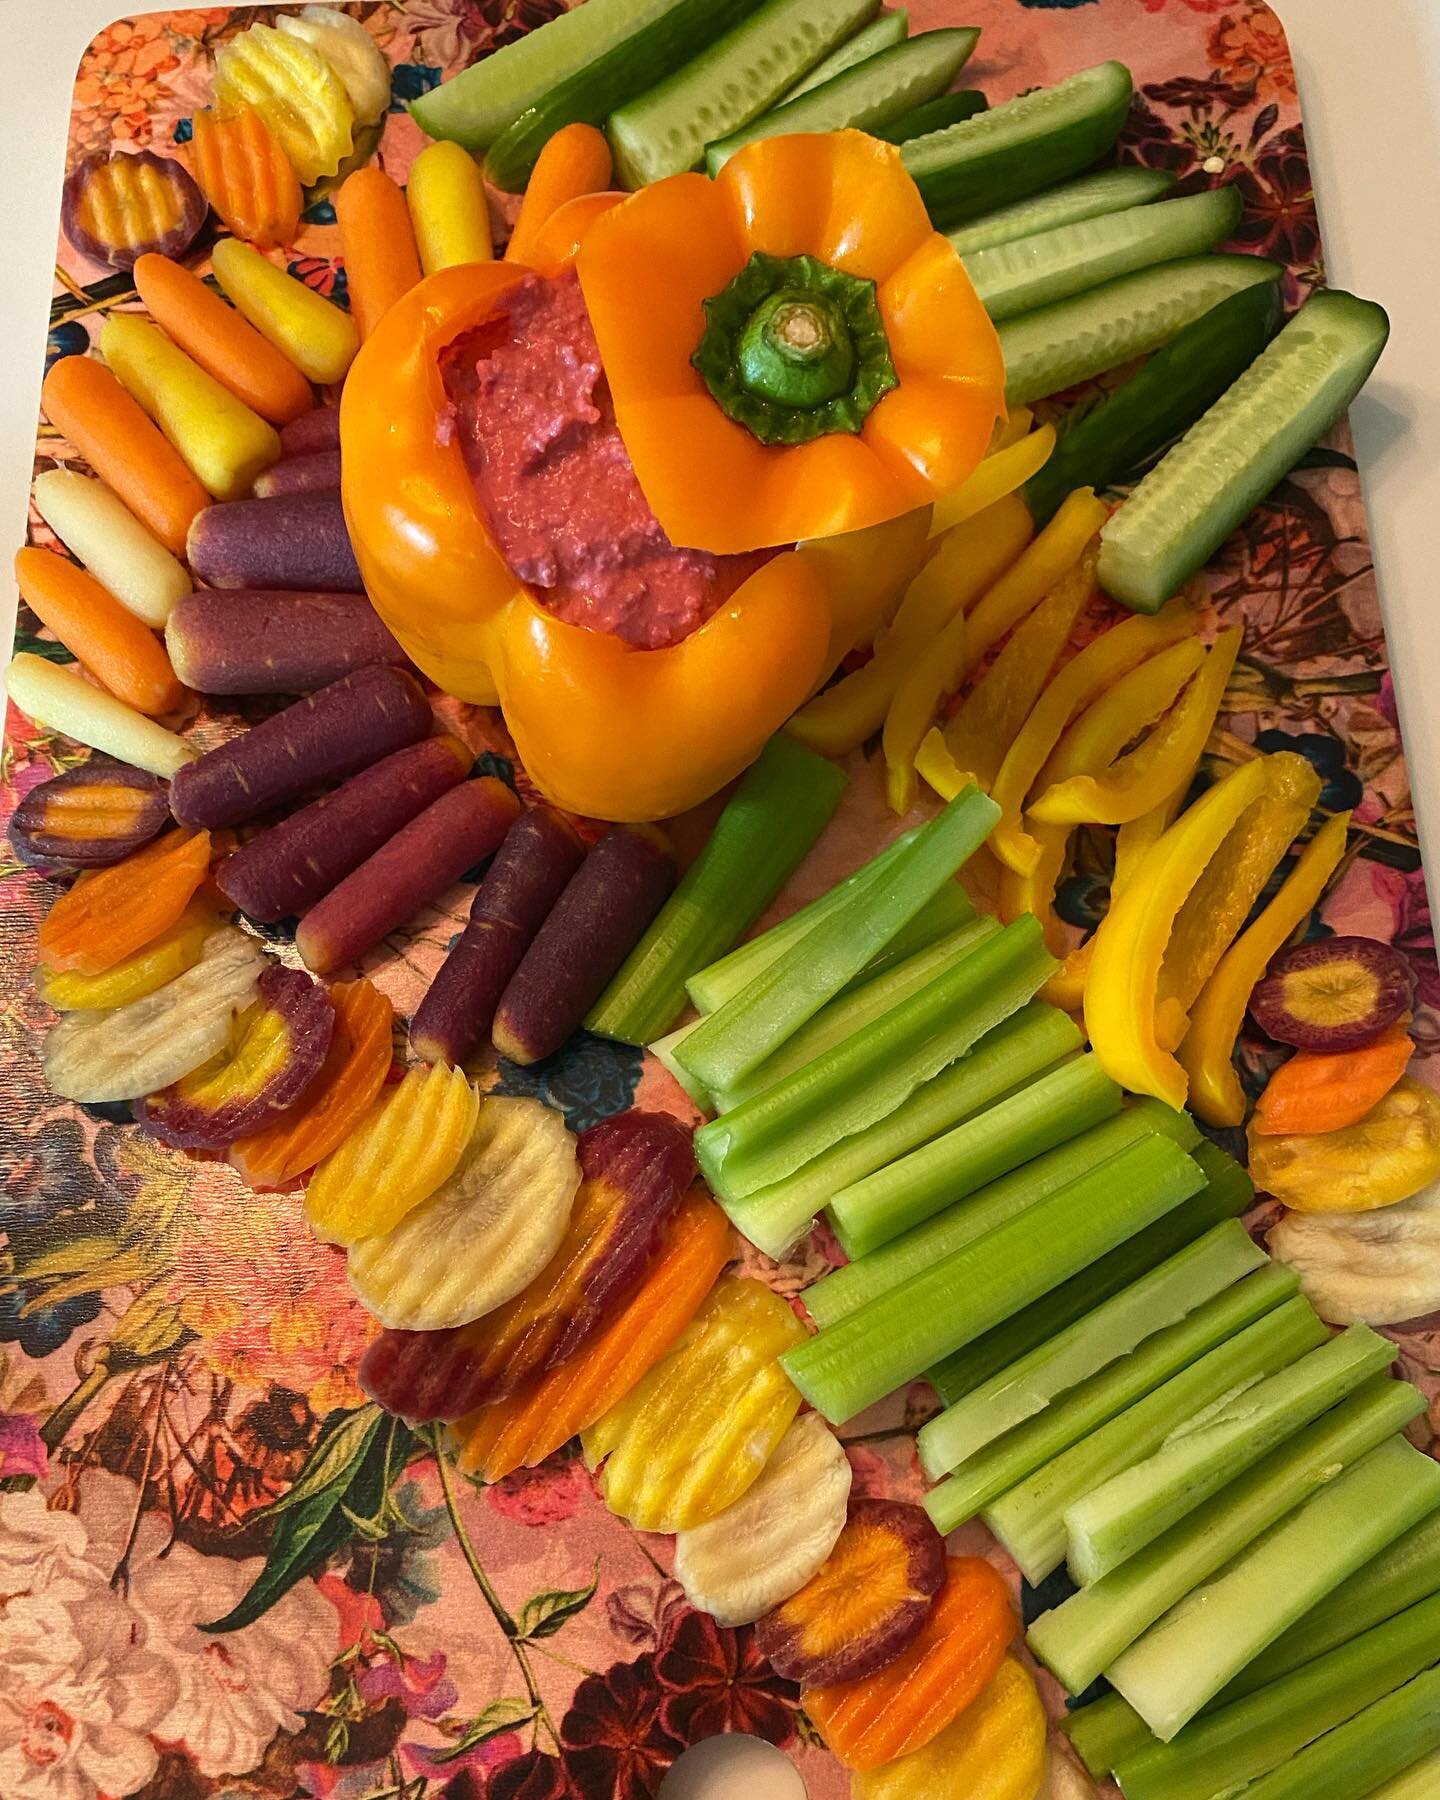 A dreary day calls for a bright veggie board shared with friends! 🌈🥰✨
.
.
.
.
.
.
.
#inthekitchwithmaris #plantbased #plantpower #eattherainbow #vegan #veganfood #beethummus #celery #rainbowcarrots #organic #yellowbellpepper #organgebellpepper #per